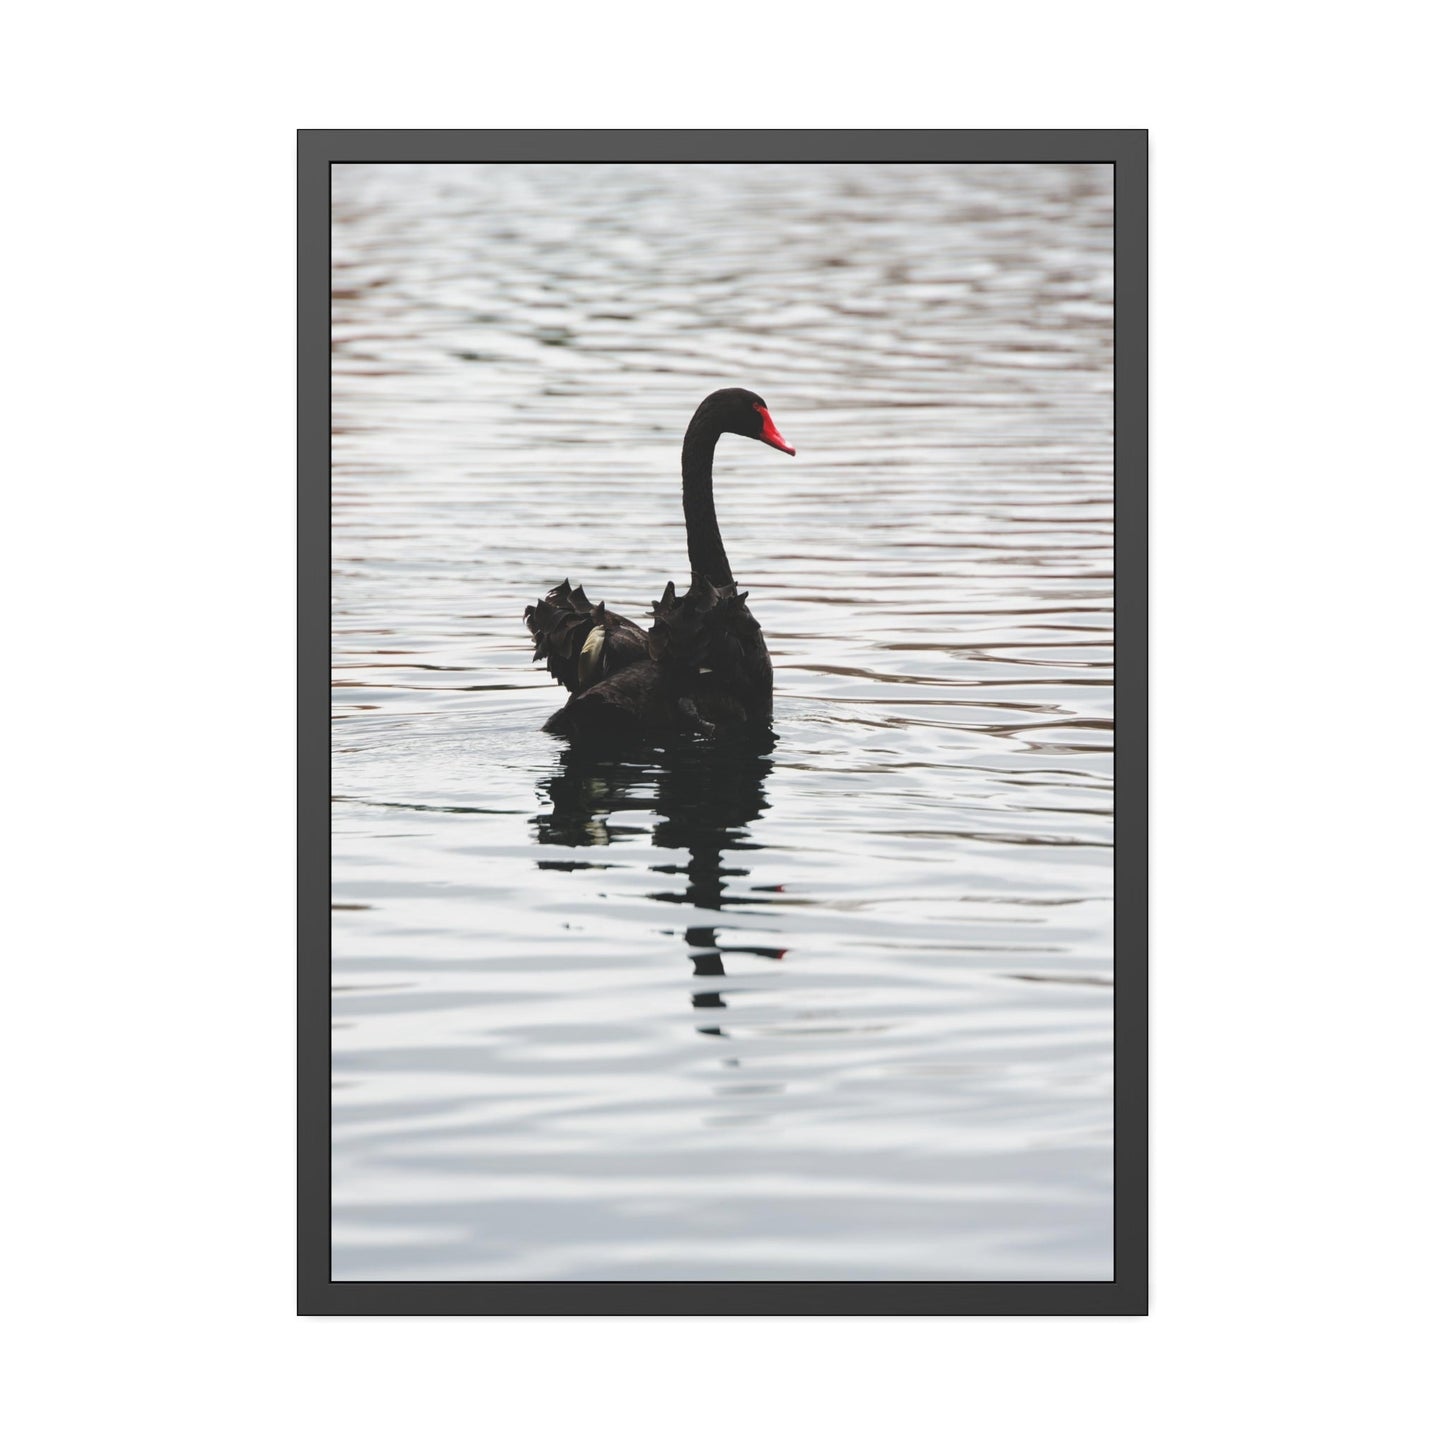 Elegance and Serenity: Poster and Canvas Art Celebrating the Poise and Calmness of Swan